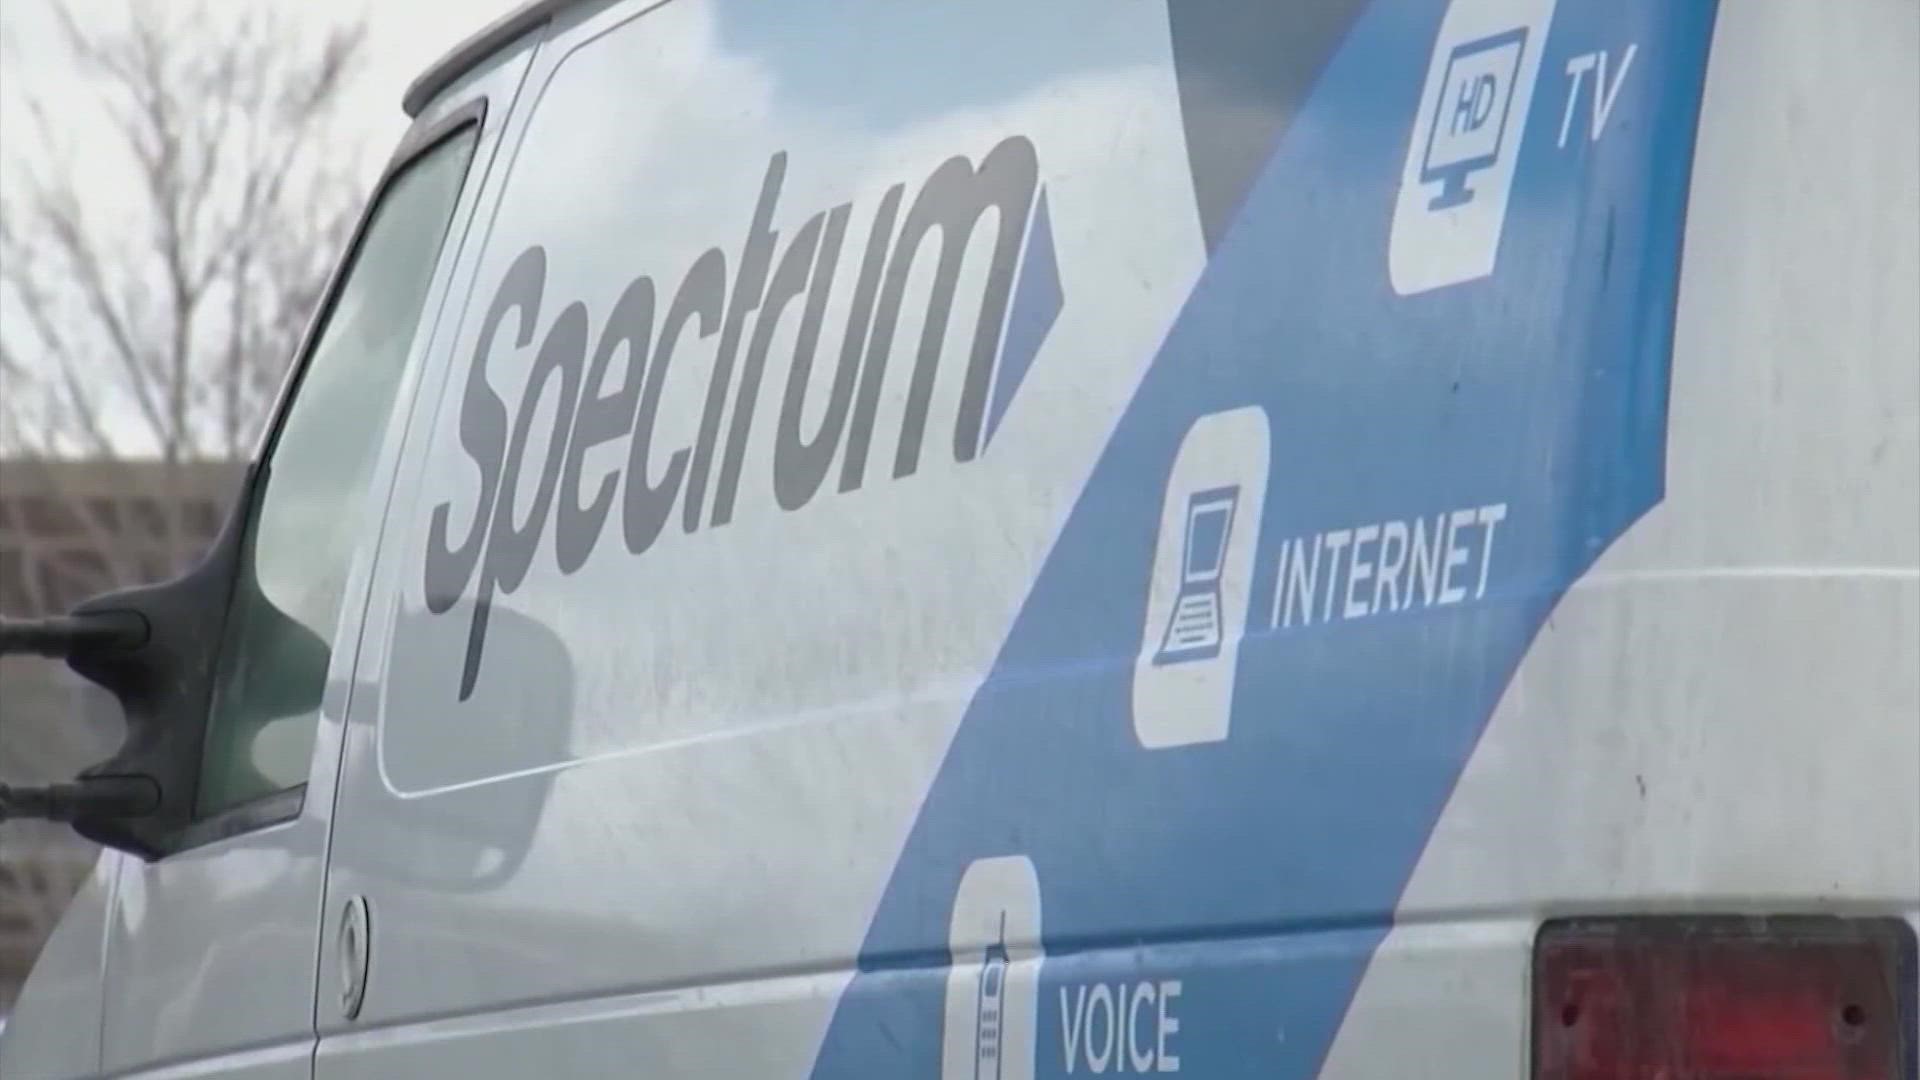 A Dallas County jury found Charter Communications, which also operates as Spectrum, acted negligently in hiring a field technician who killed one of its customers.